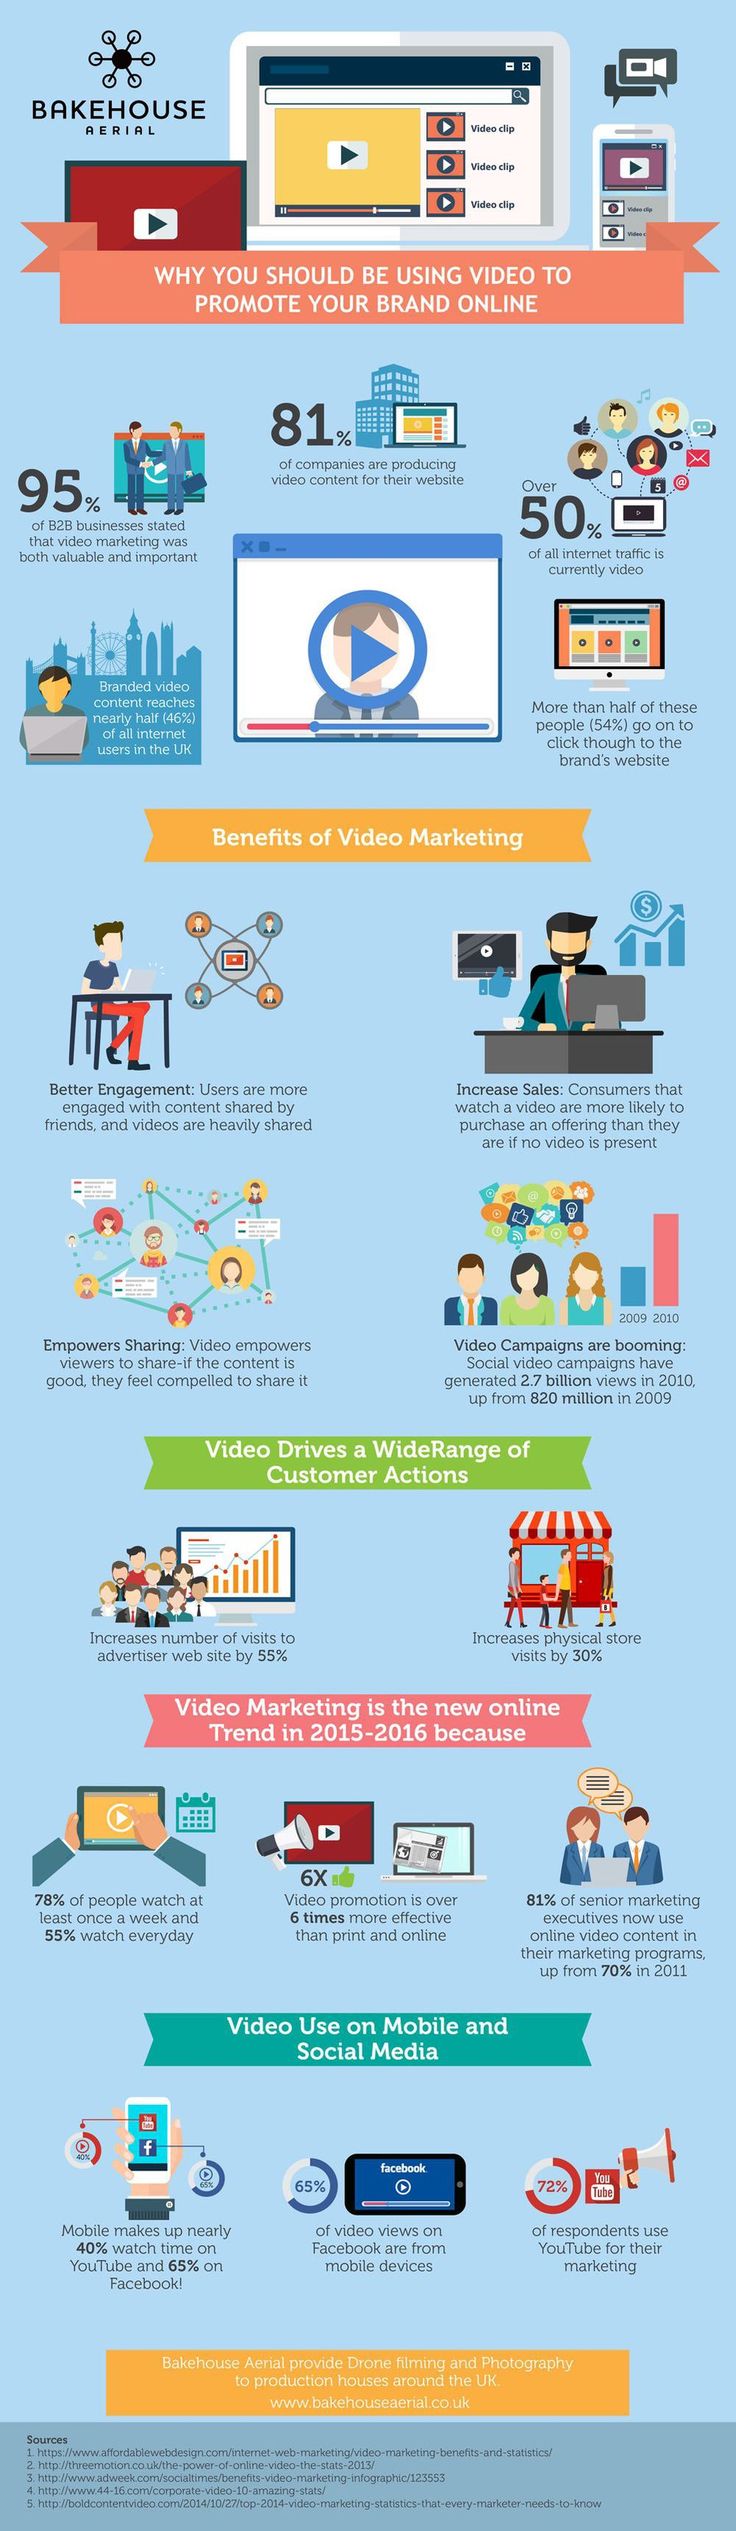 5 Tips for Using Video in Your Social Media Marketing Strategy [Infographic] | S...